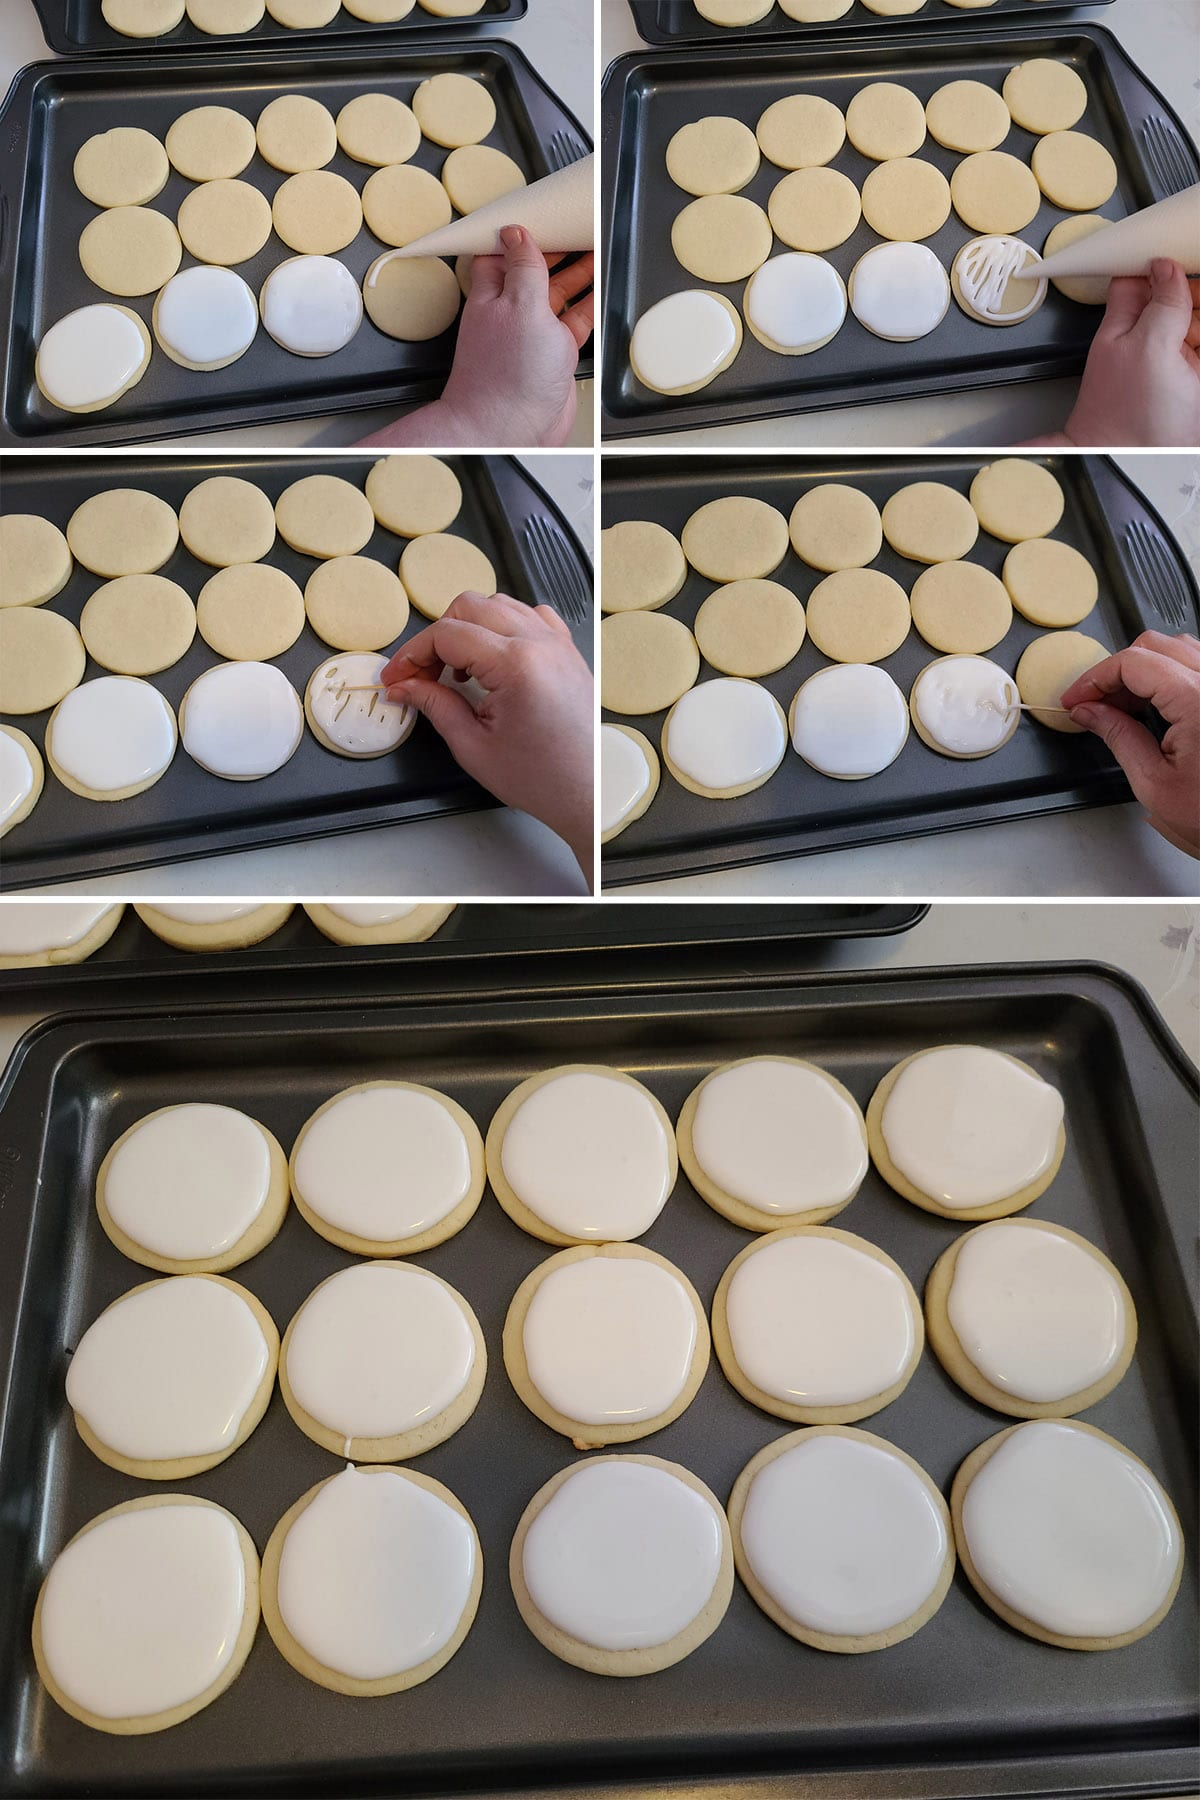 A 5 part image showing royal icing being piped out into smooth round circles on each cookie.